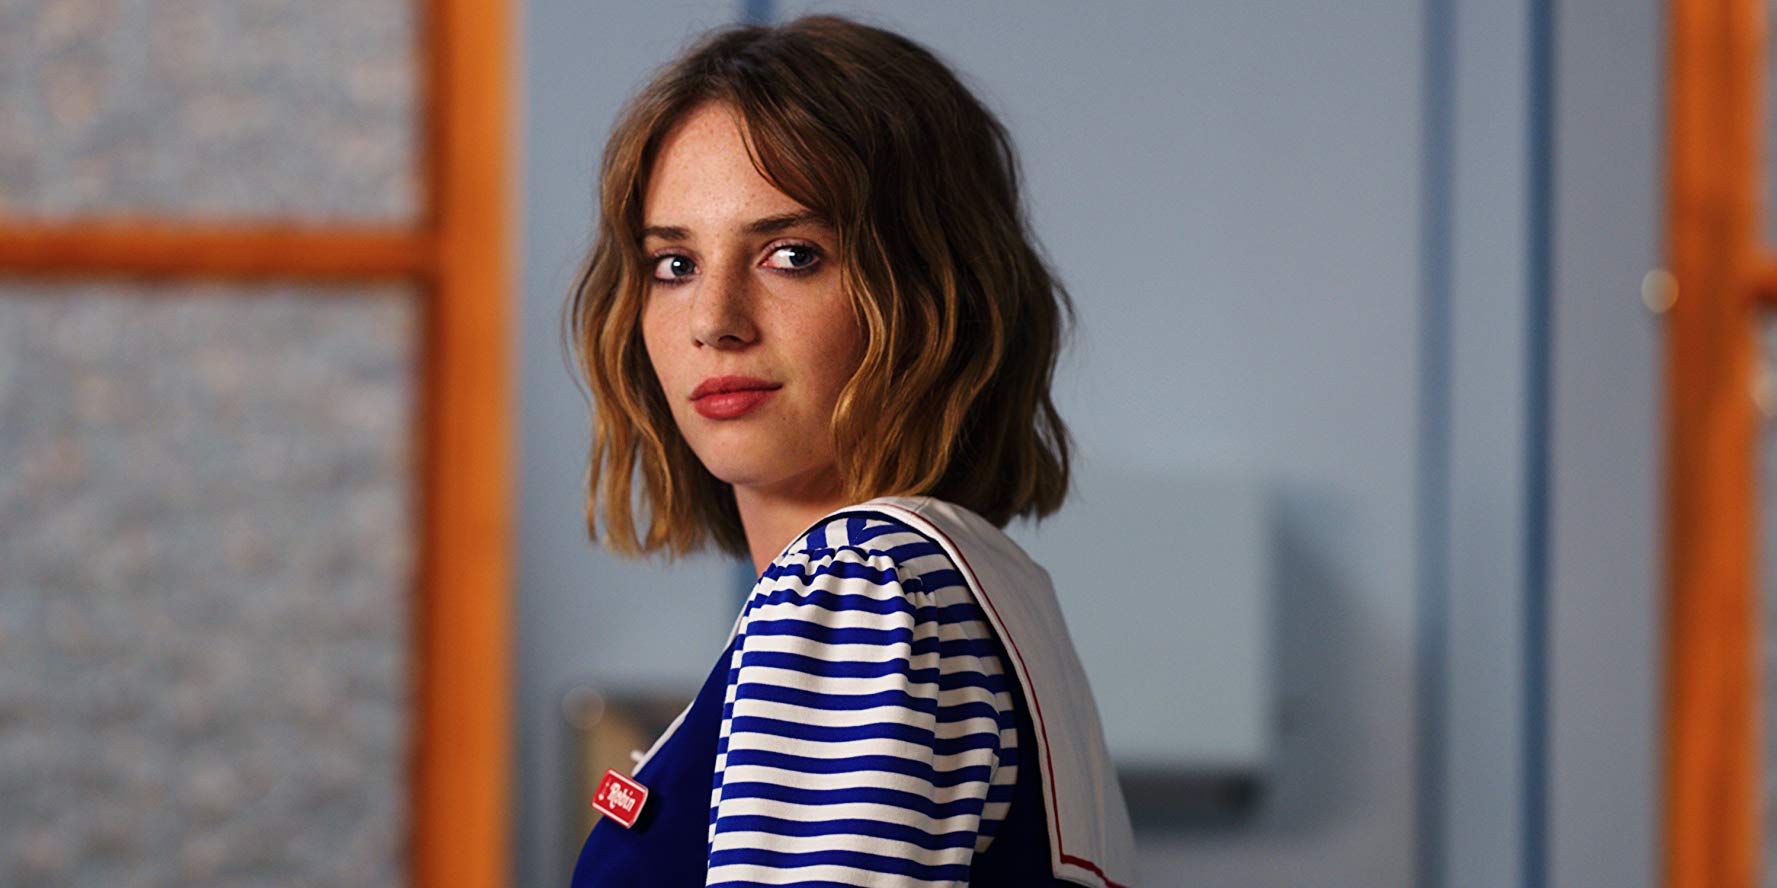 Actors who could play Ghost-Spider: Maya Hawke